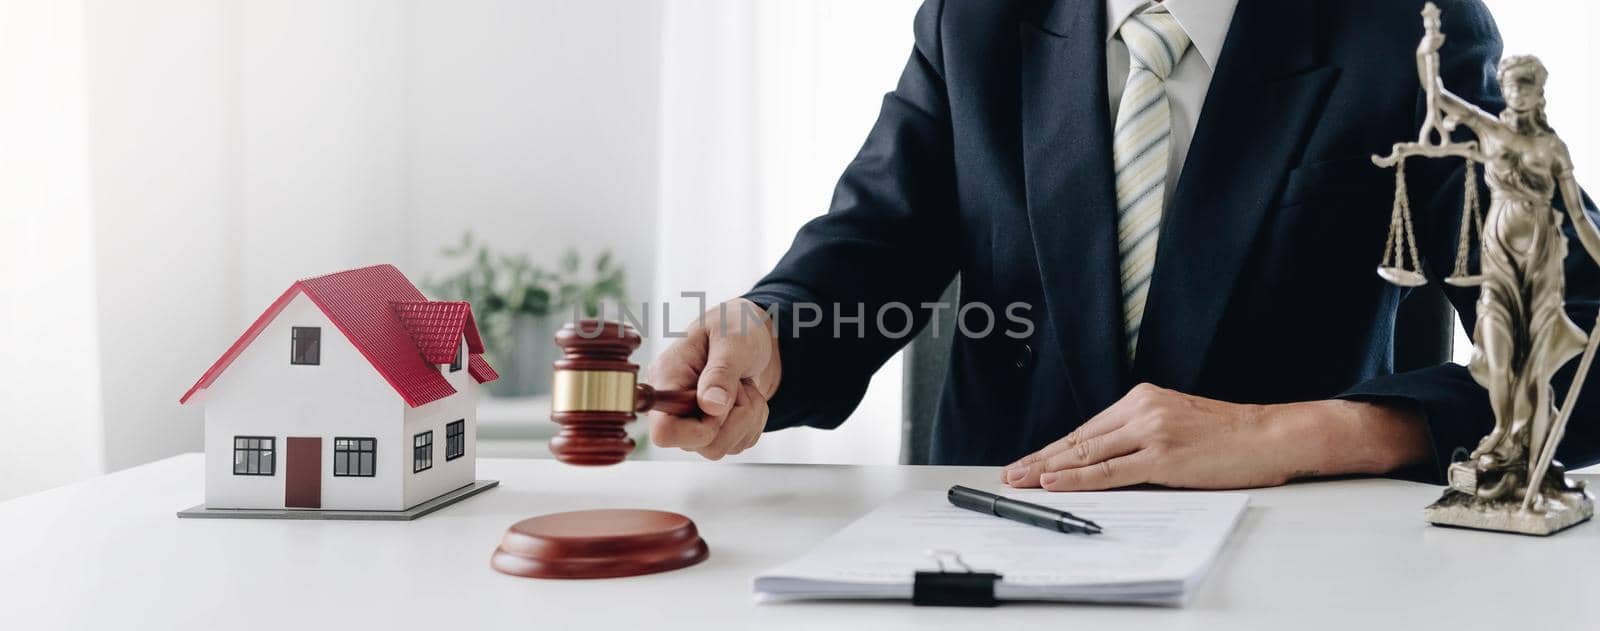 Stern judge with paper document pronouncing sentence in a court of law. Judge finds the accused guilty, passes judgement and rules case closed. Hand holding gavel and hitting sound block in close-up by wichayada